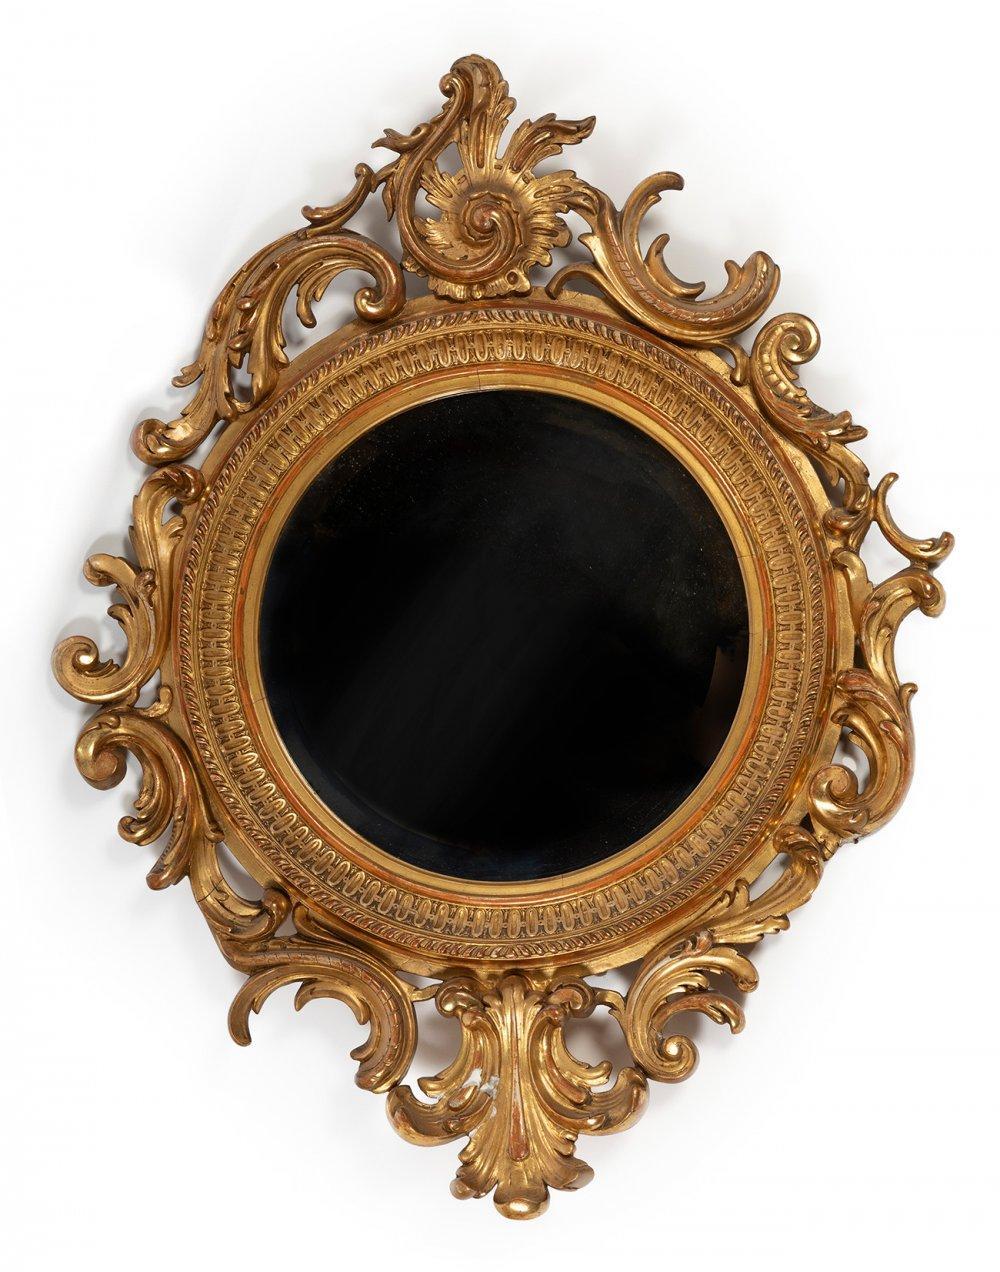 Anonymous
Europe; ca. 1870
Giltwood and stucco

Approximate size: 33.5 (h) x 26.25 (w) x 1 (d) inches

An elegant giltwood and stucco framed rounded mirror in the French Empire style. Profuse foliate motifs and scrolling acanthi surround a molded